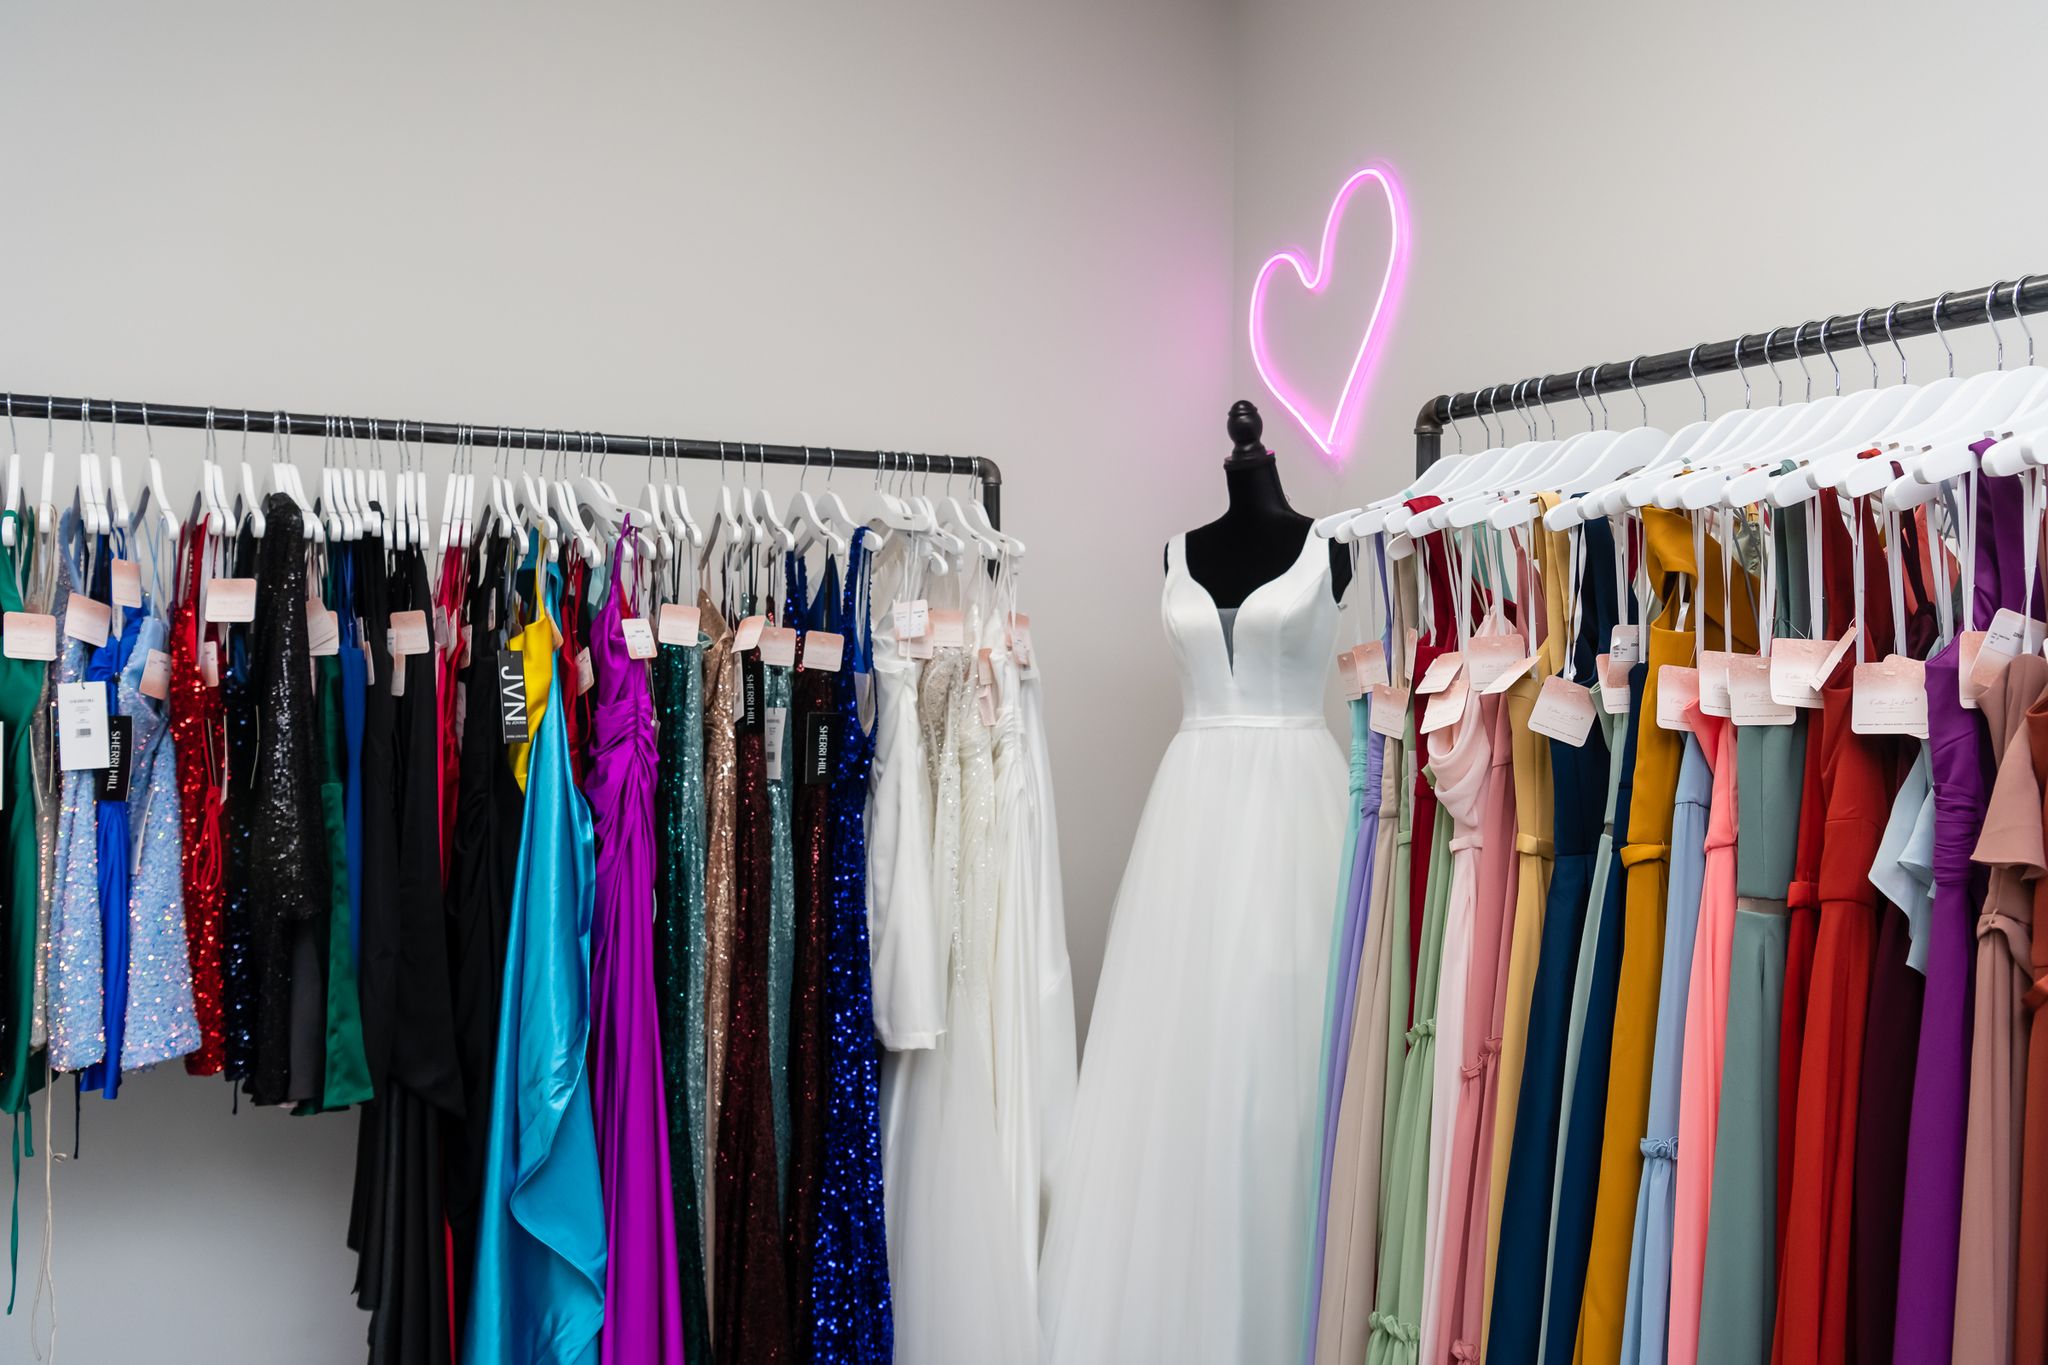 Fallen In Love also offers a wide selection of formal dresses.